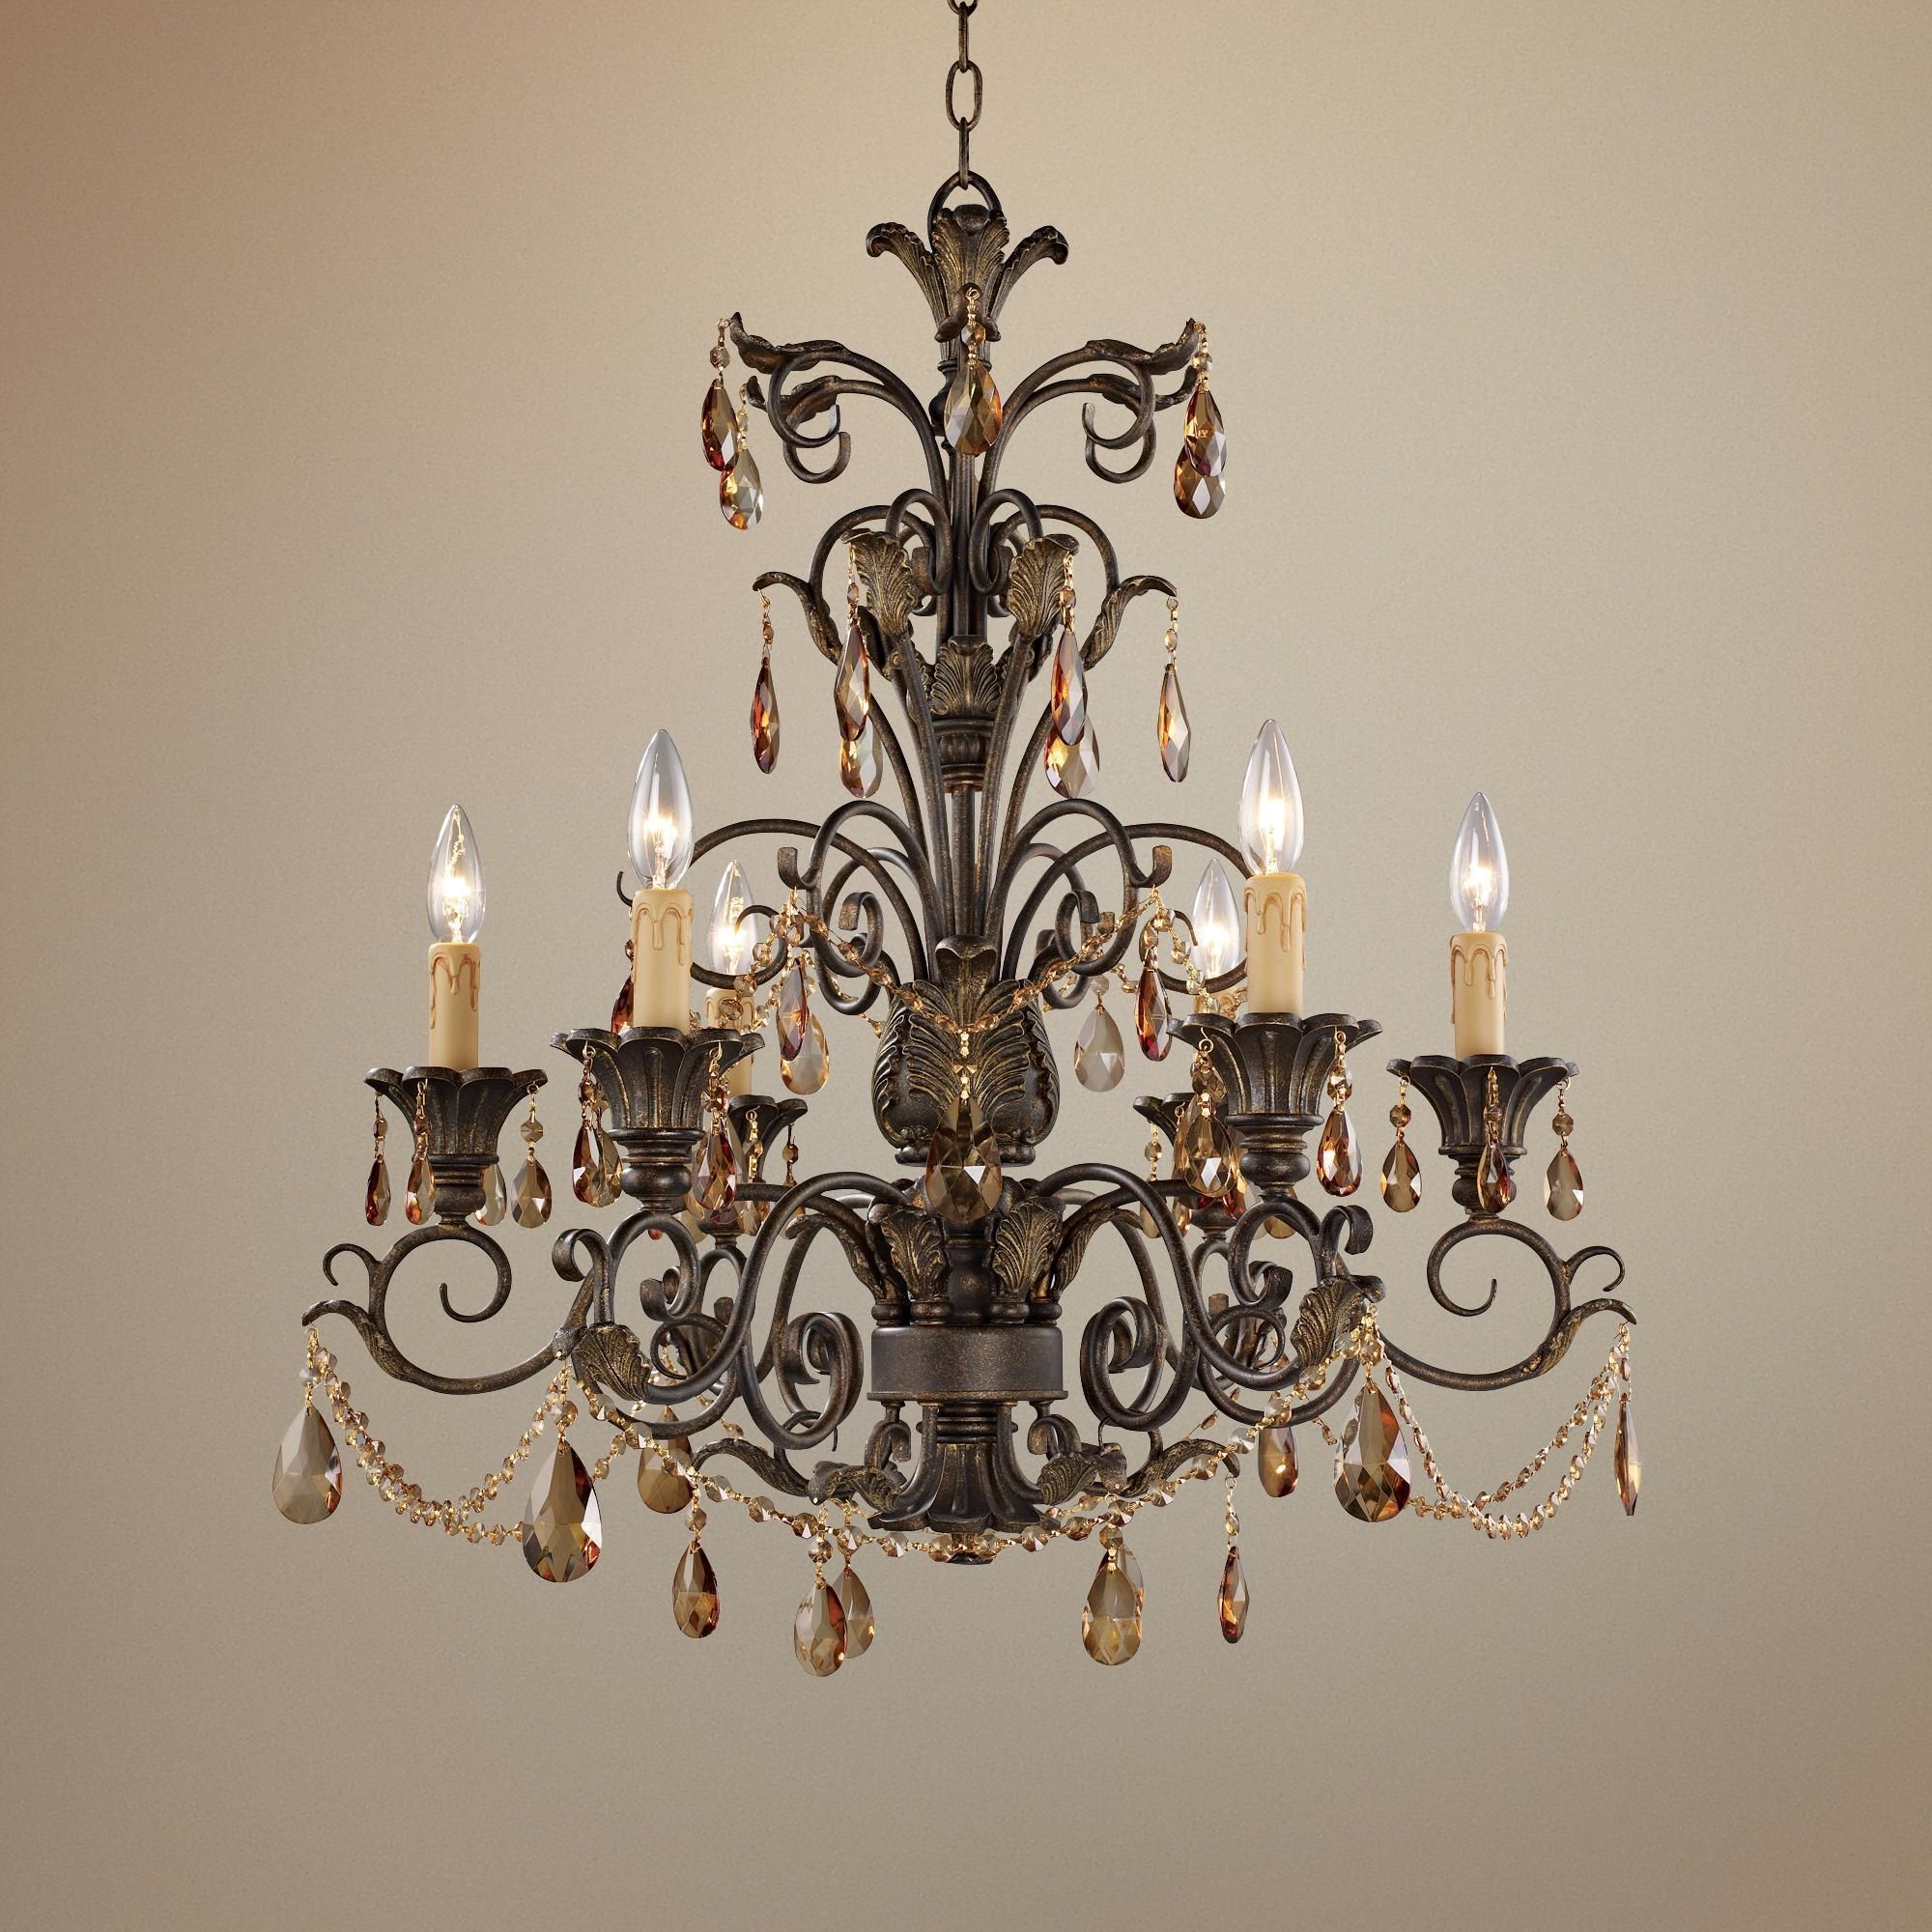 Roman Bronze And Crystal Chandeliers Pertaining To Popular Rochelle Collection 6 Light Chandelier – # (View 3 of 15)